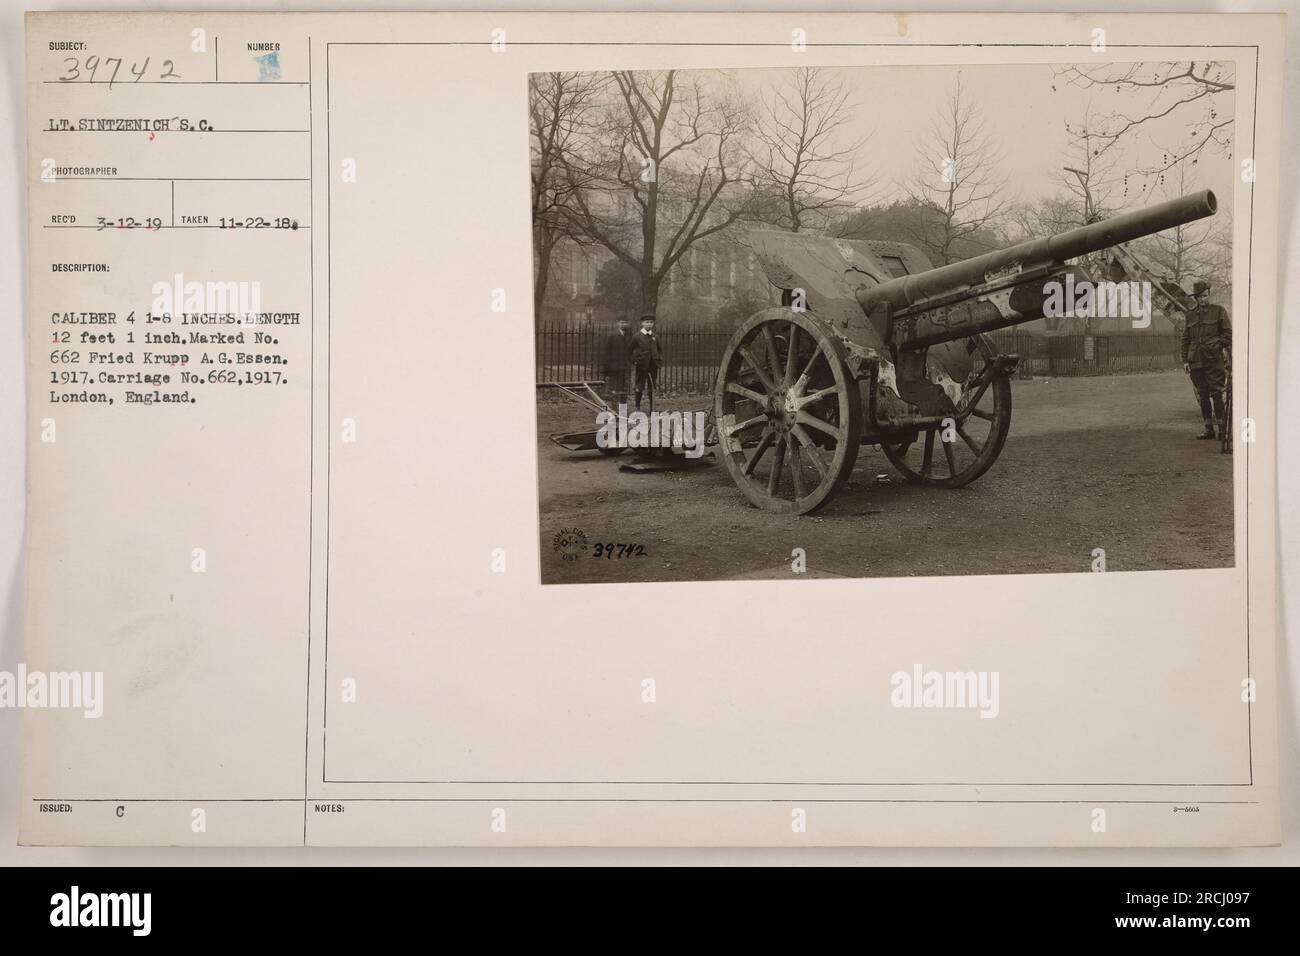 Lt. Sintzenich is shown in this photograph. The image provides details on a military artillery piece, a caliber 4 1-8 inch, measuring 12 feet 1 inch, marked No. 662 Fried Krupp A. G. Essen. 1917. The carriage is also marked No.662, manufactured in 1917 in London, England. The photograph was taken on November 22, 1918, as recorded by photographer RECO on March 12, 1919. The notes also reference number 39742. Stock Photo